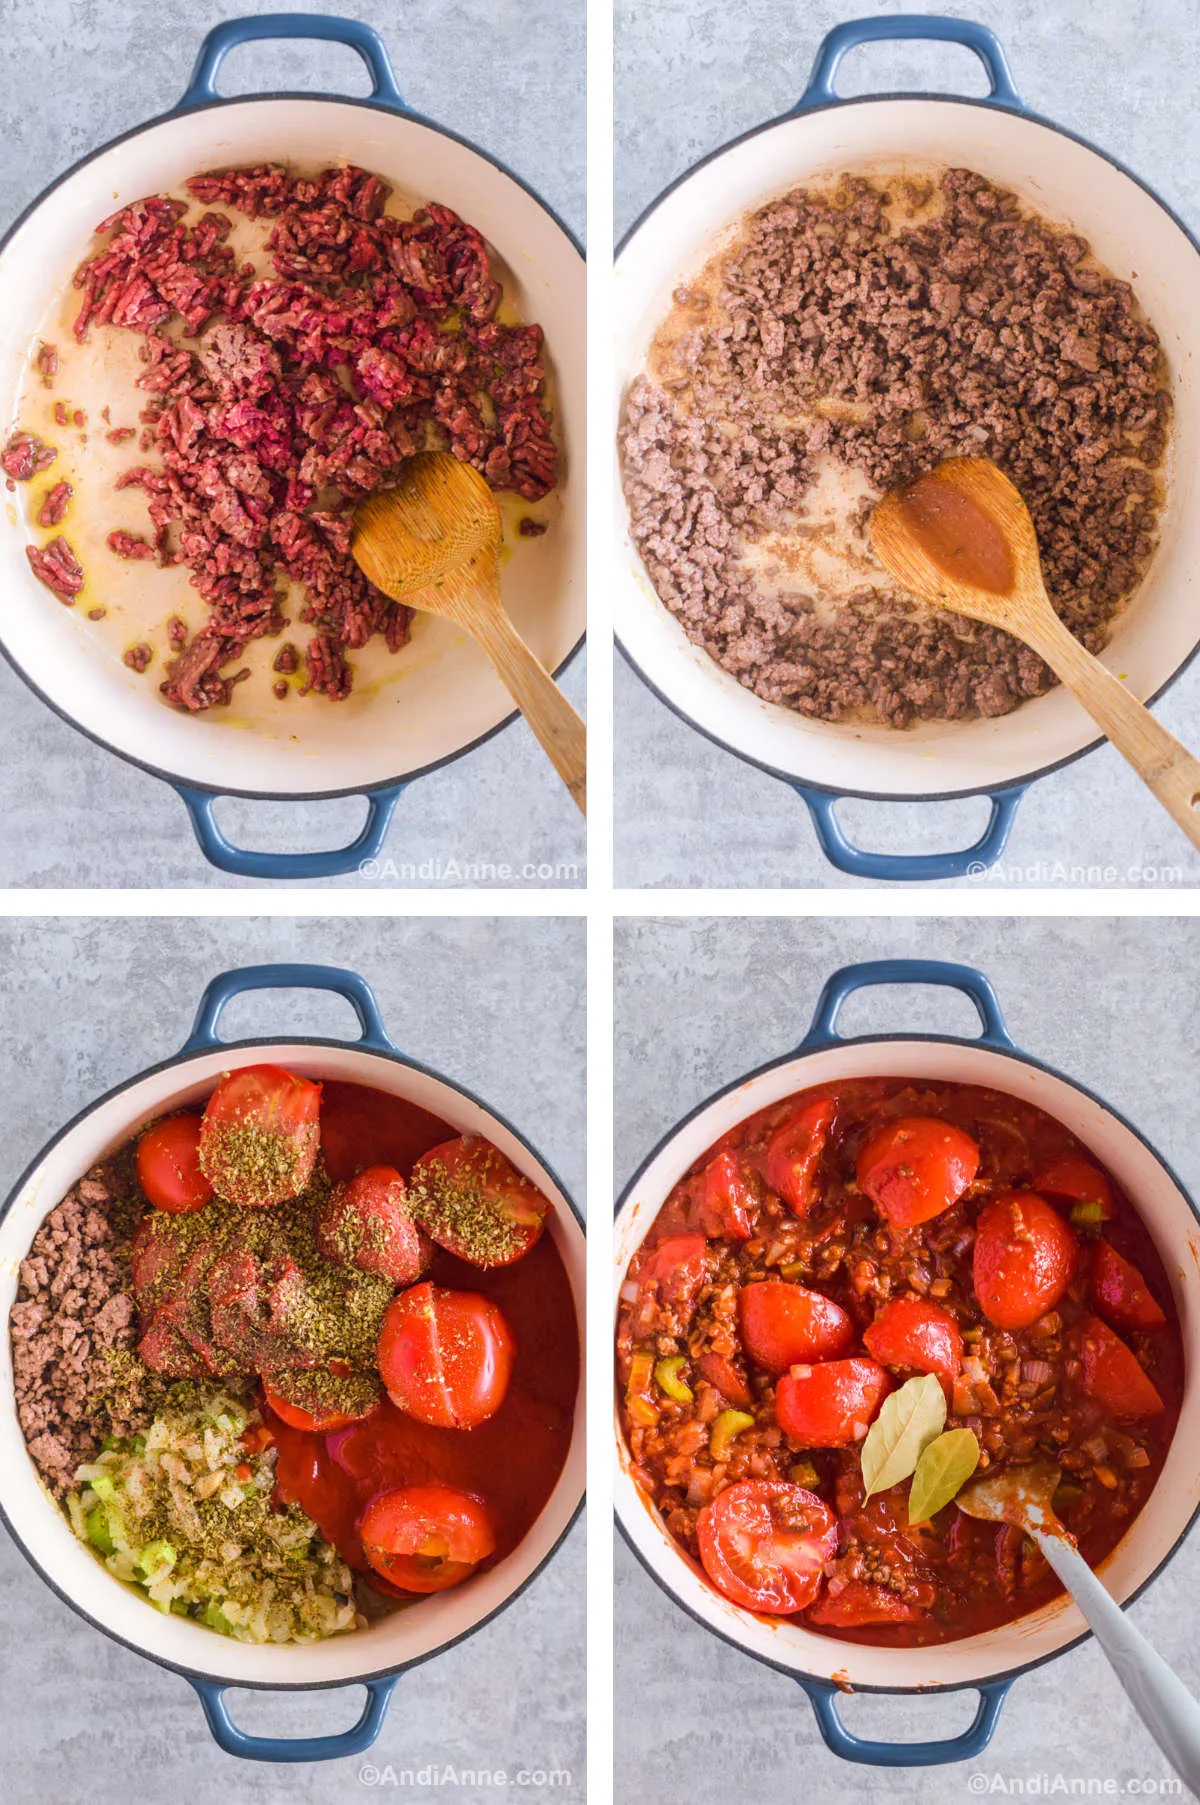 Four images in one: 1. Raw ground beef in pot. 2. Cooked ground beef in pot. 3. All vegetables, ground beef, tomatoes, sauce, tomato paste and herbs in pot. 4. All ingredients combined in pot. 